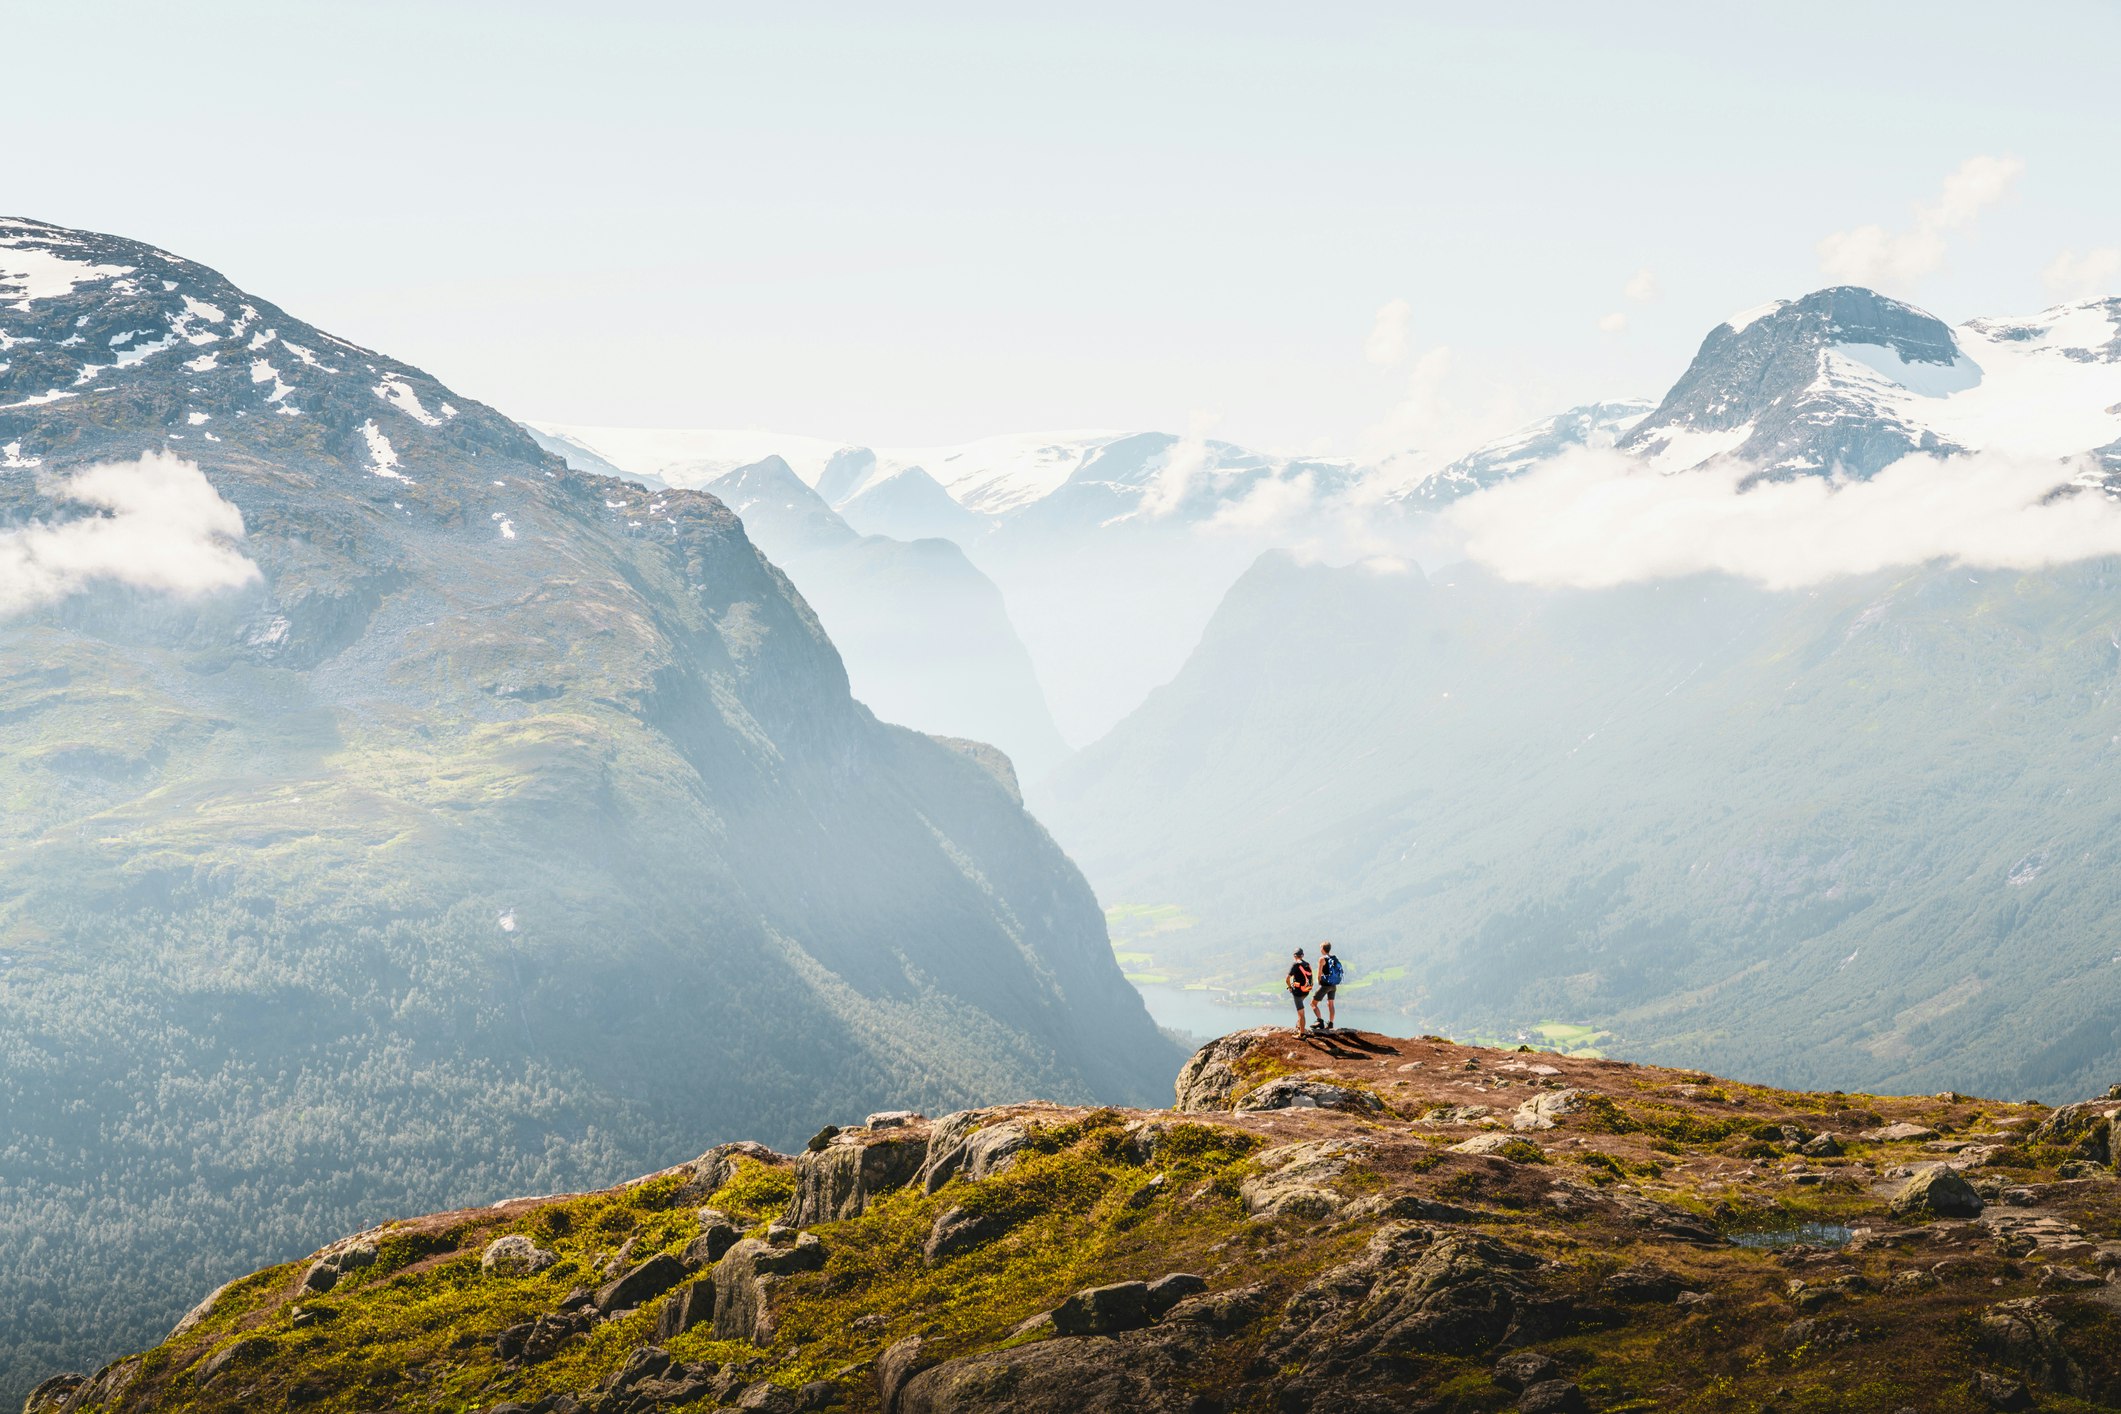 Tourists admiring the view from the top of a mountain in Loen, Norway. The valley stretches on for miles.